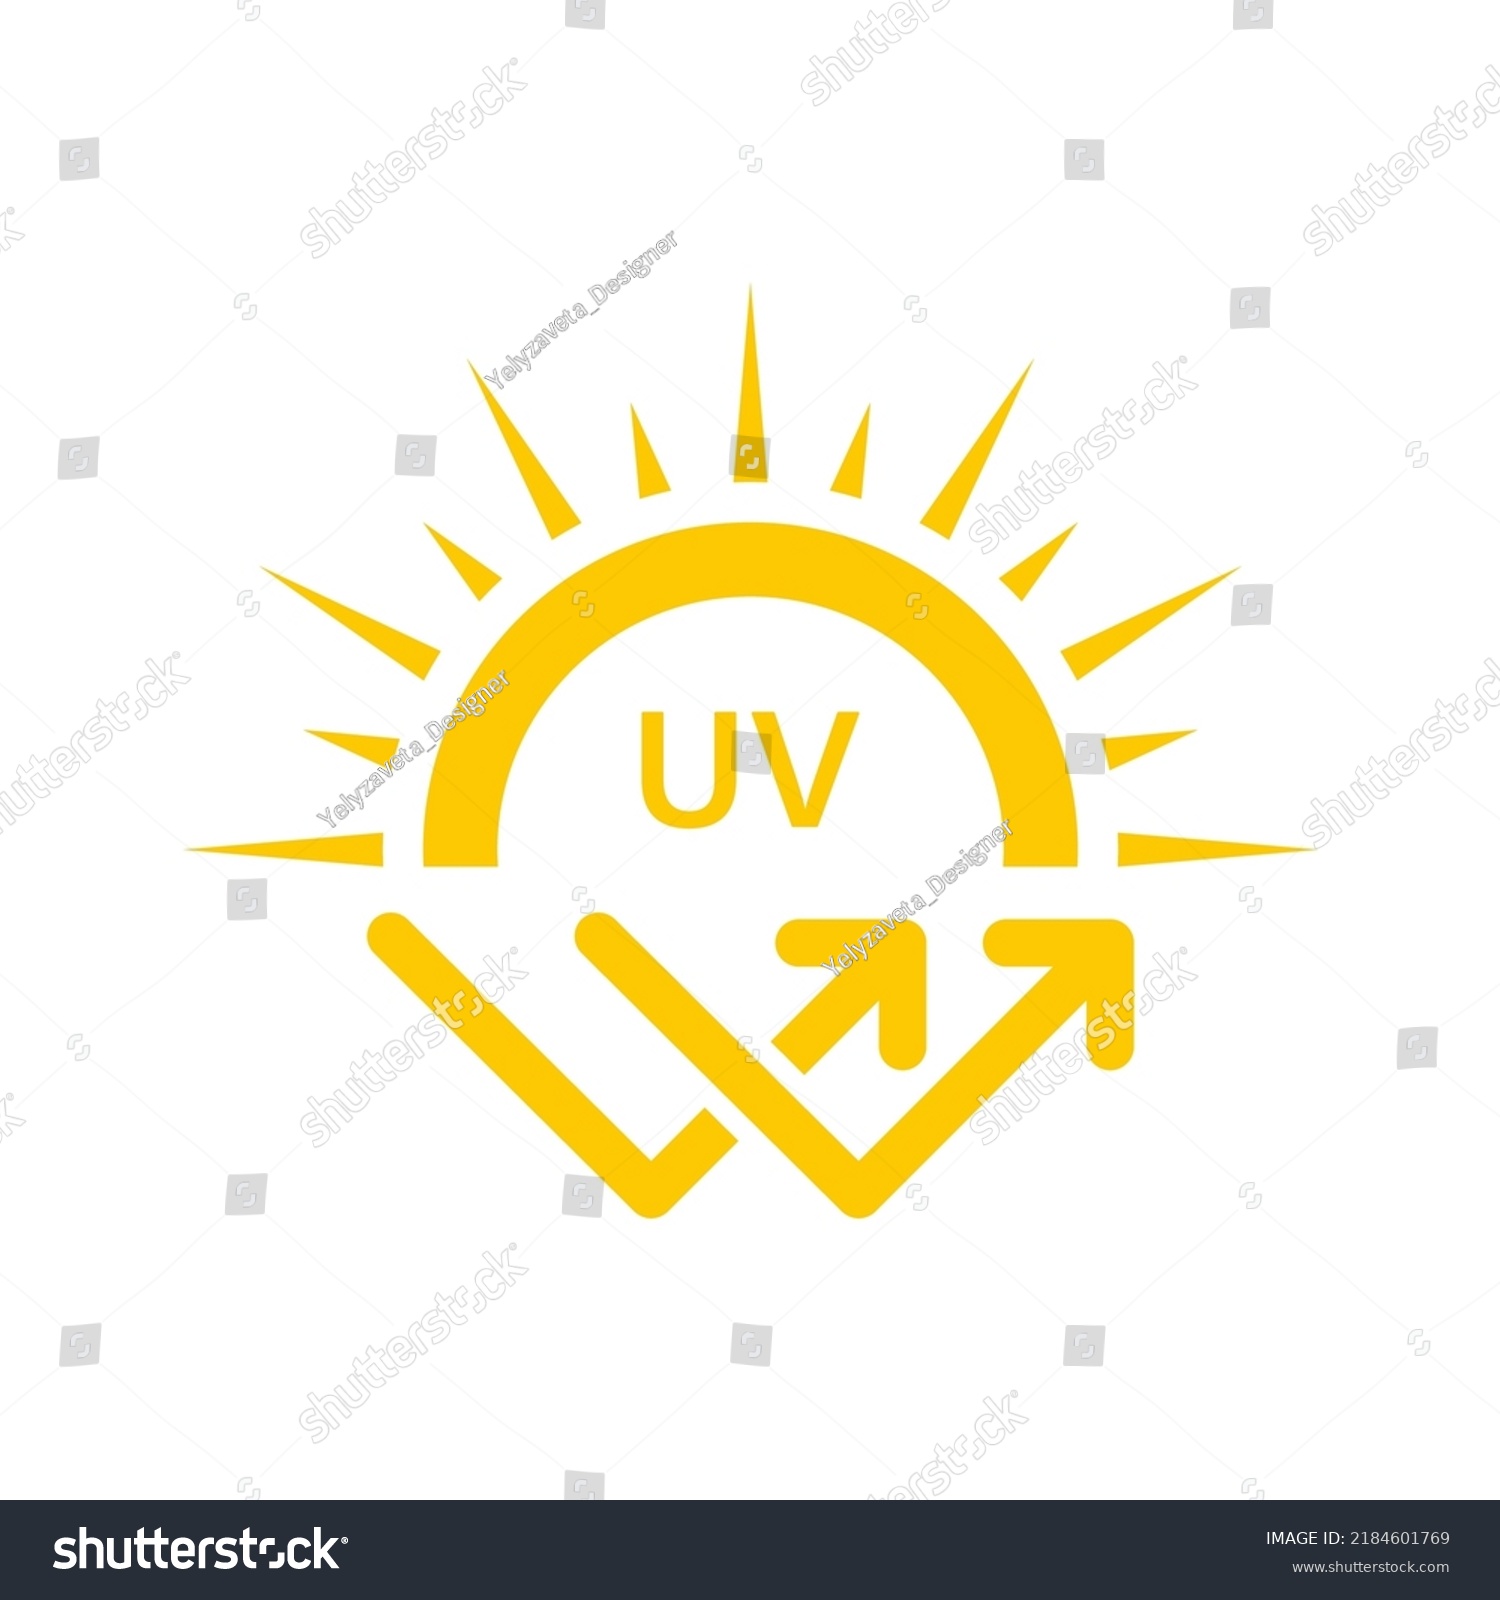 Ultraviolet Rays Silhouette Yellow Icon. Sunblock Protection Defense Skin Care Icon. SPF Sun Ray Resistant Sunblock. Sun UV Arrow Protect Radiation Glyph Pictogram. Isolated Vector Illustration. #2184601769